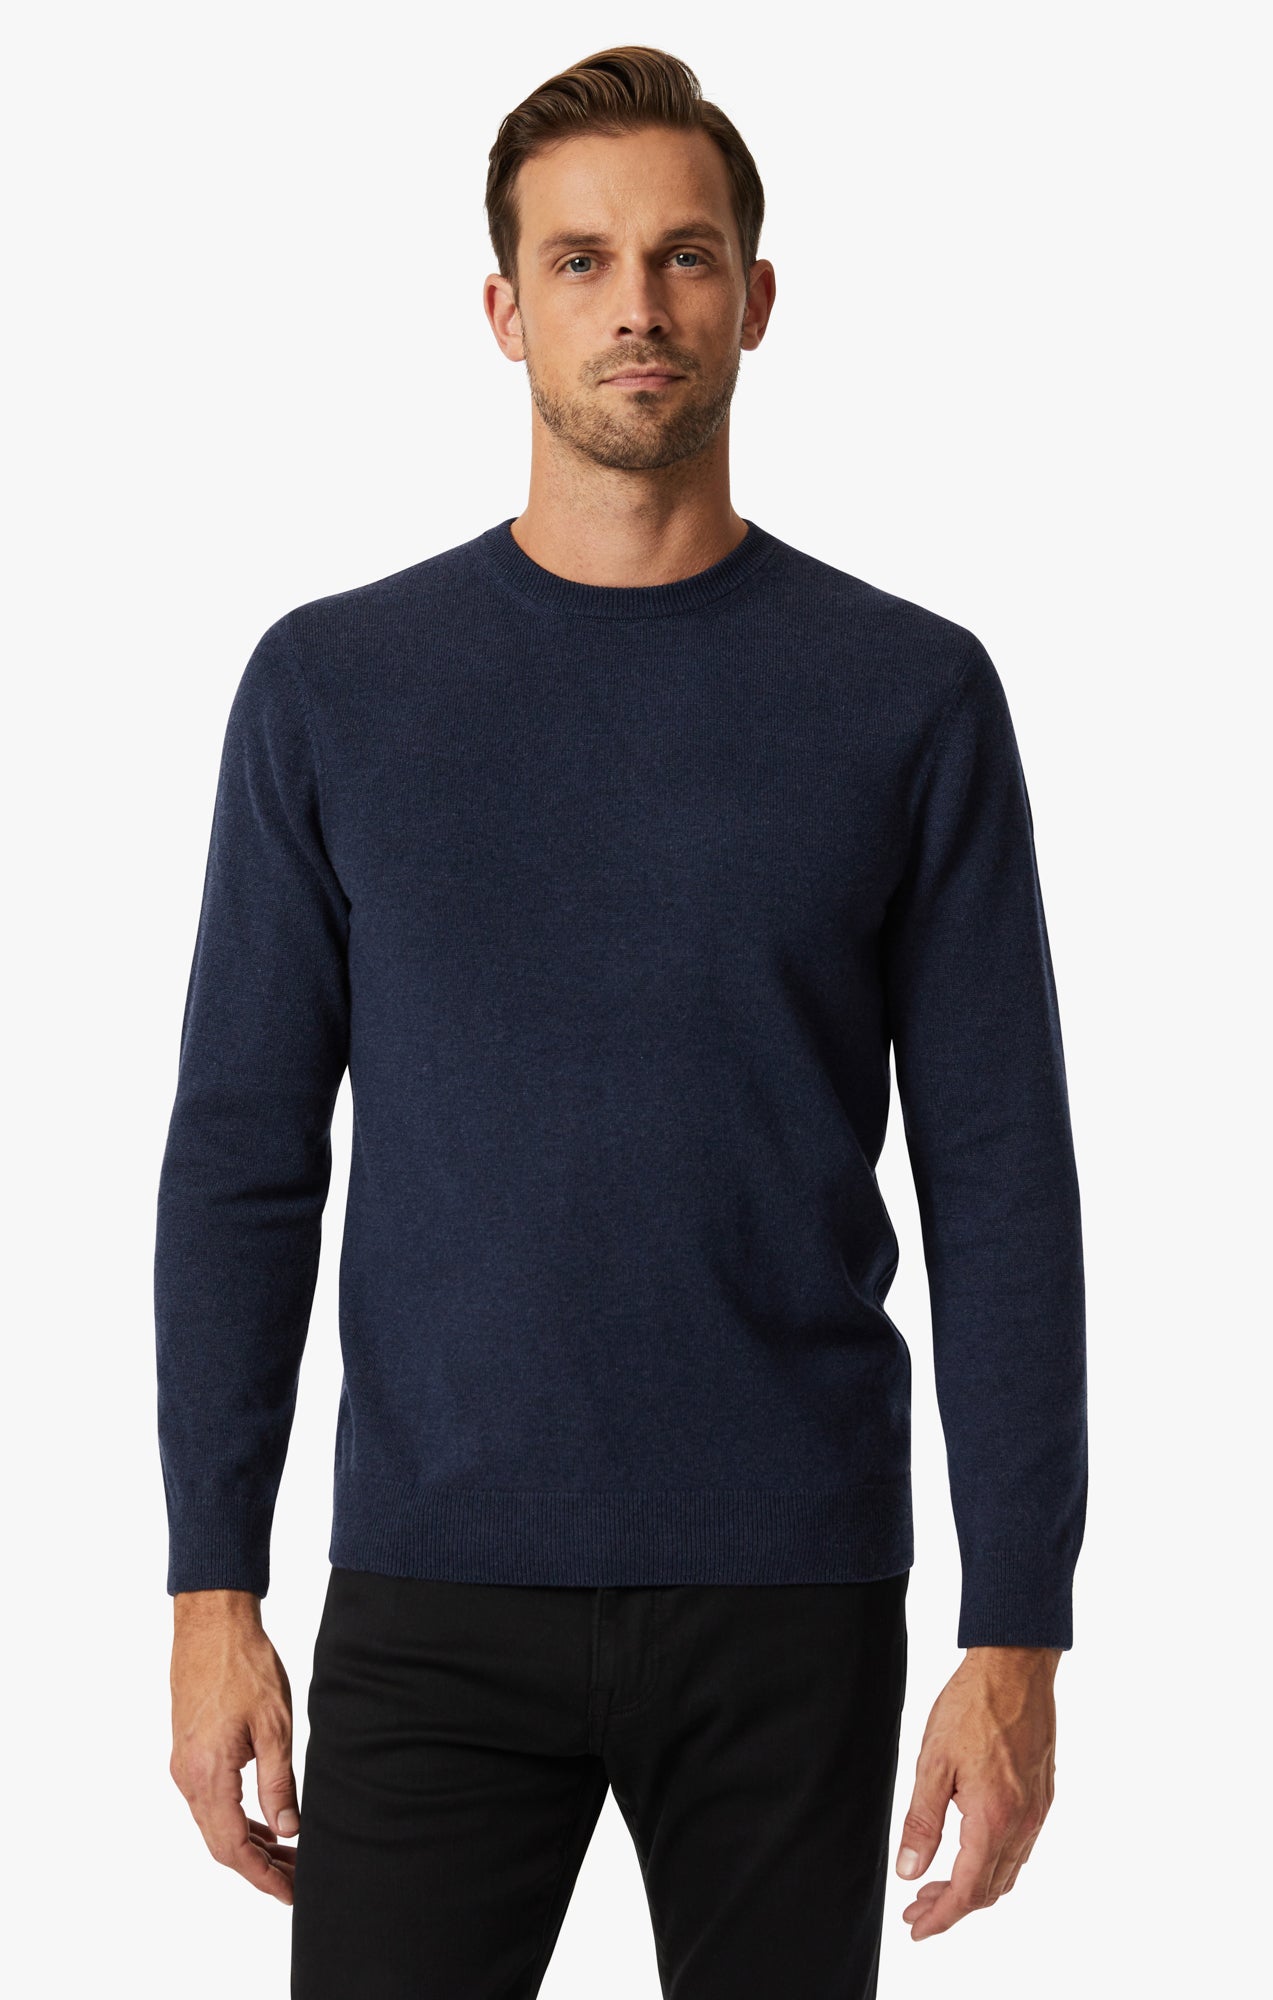 Cashmere Crew Neck Sweater In Navy Image 1